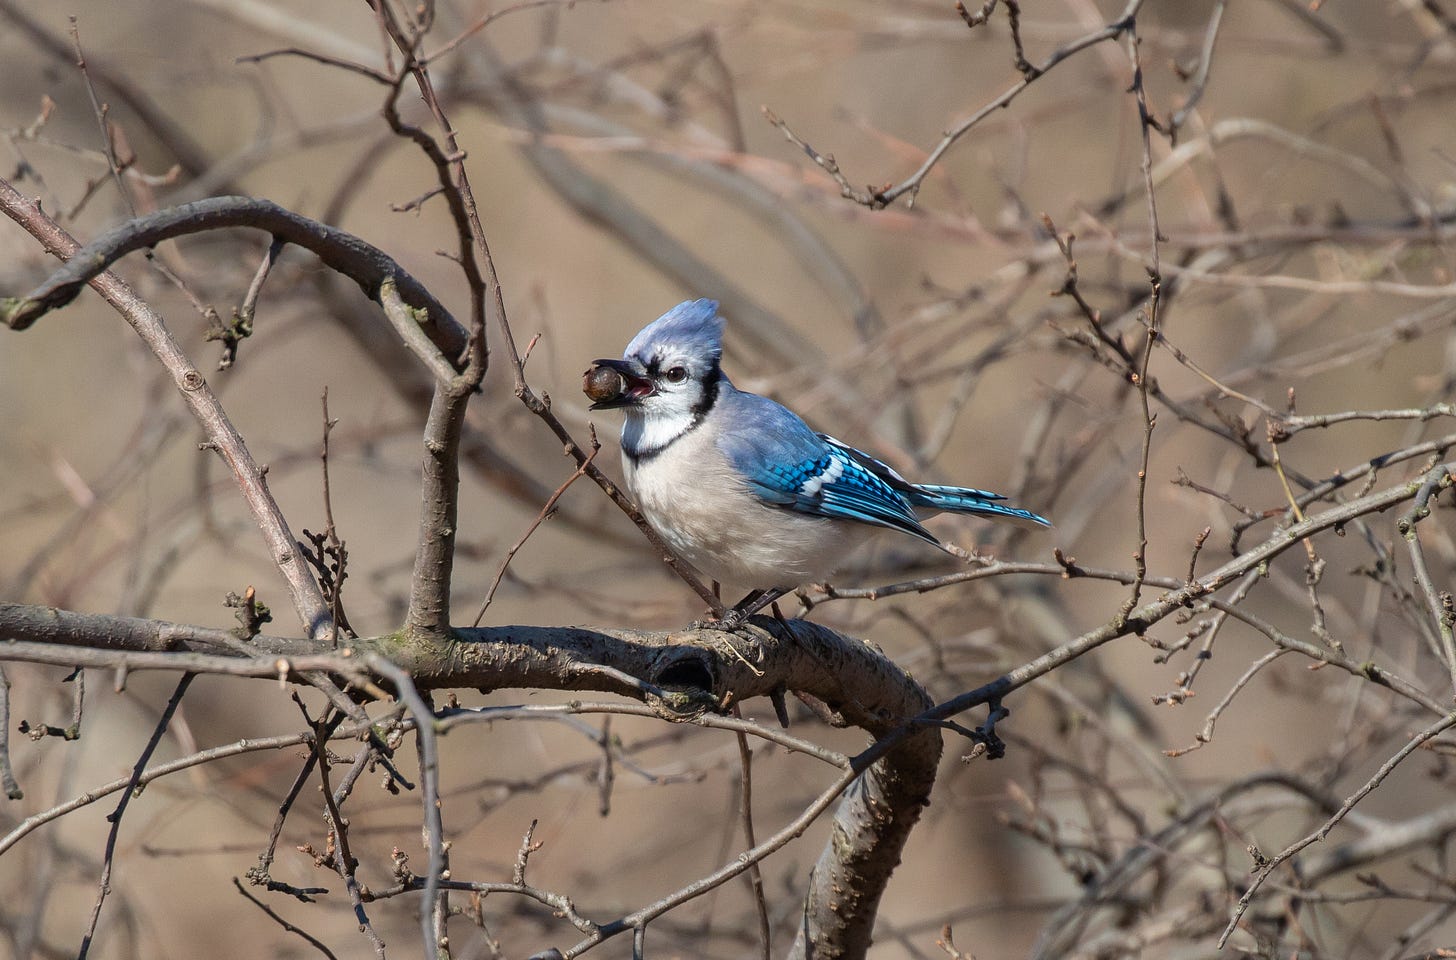 a bird with a blue tuft, blue back, patterned blue wings, black collar, and pale belly standing in a bare tree with an acorn in its black beak